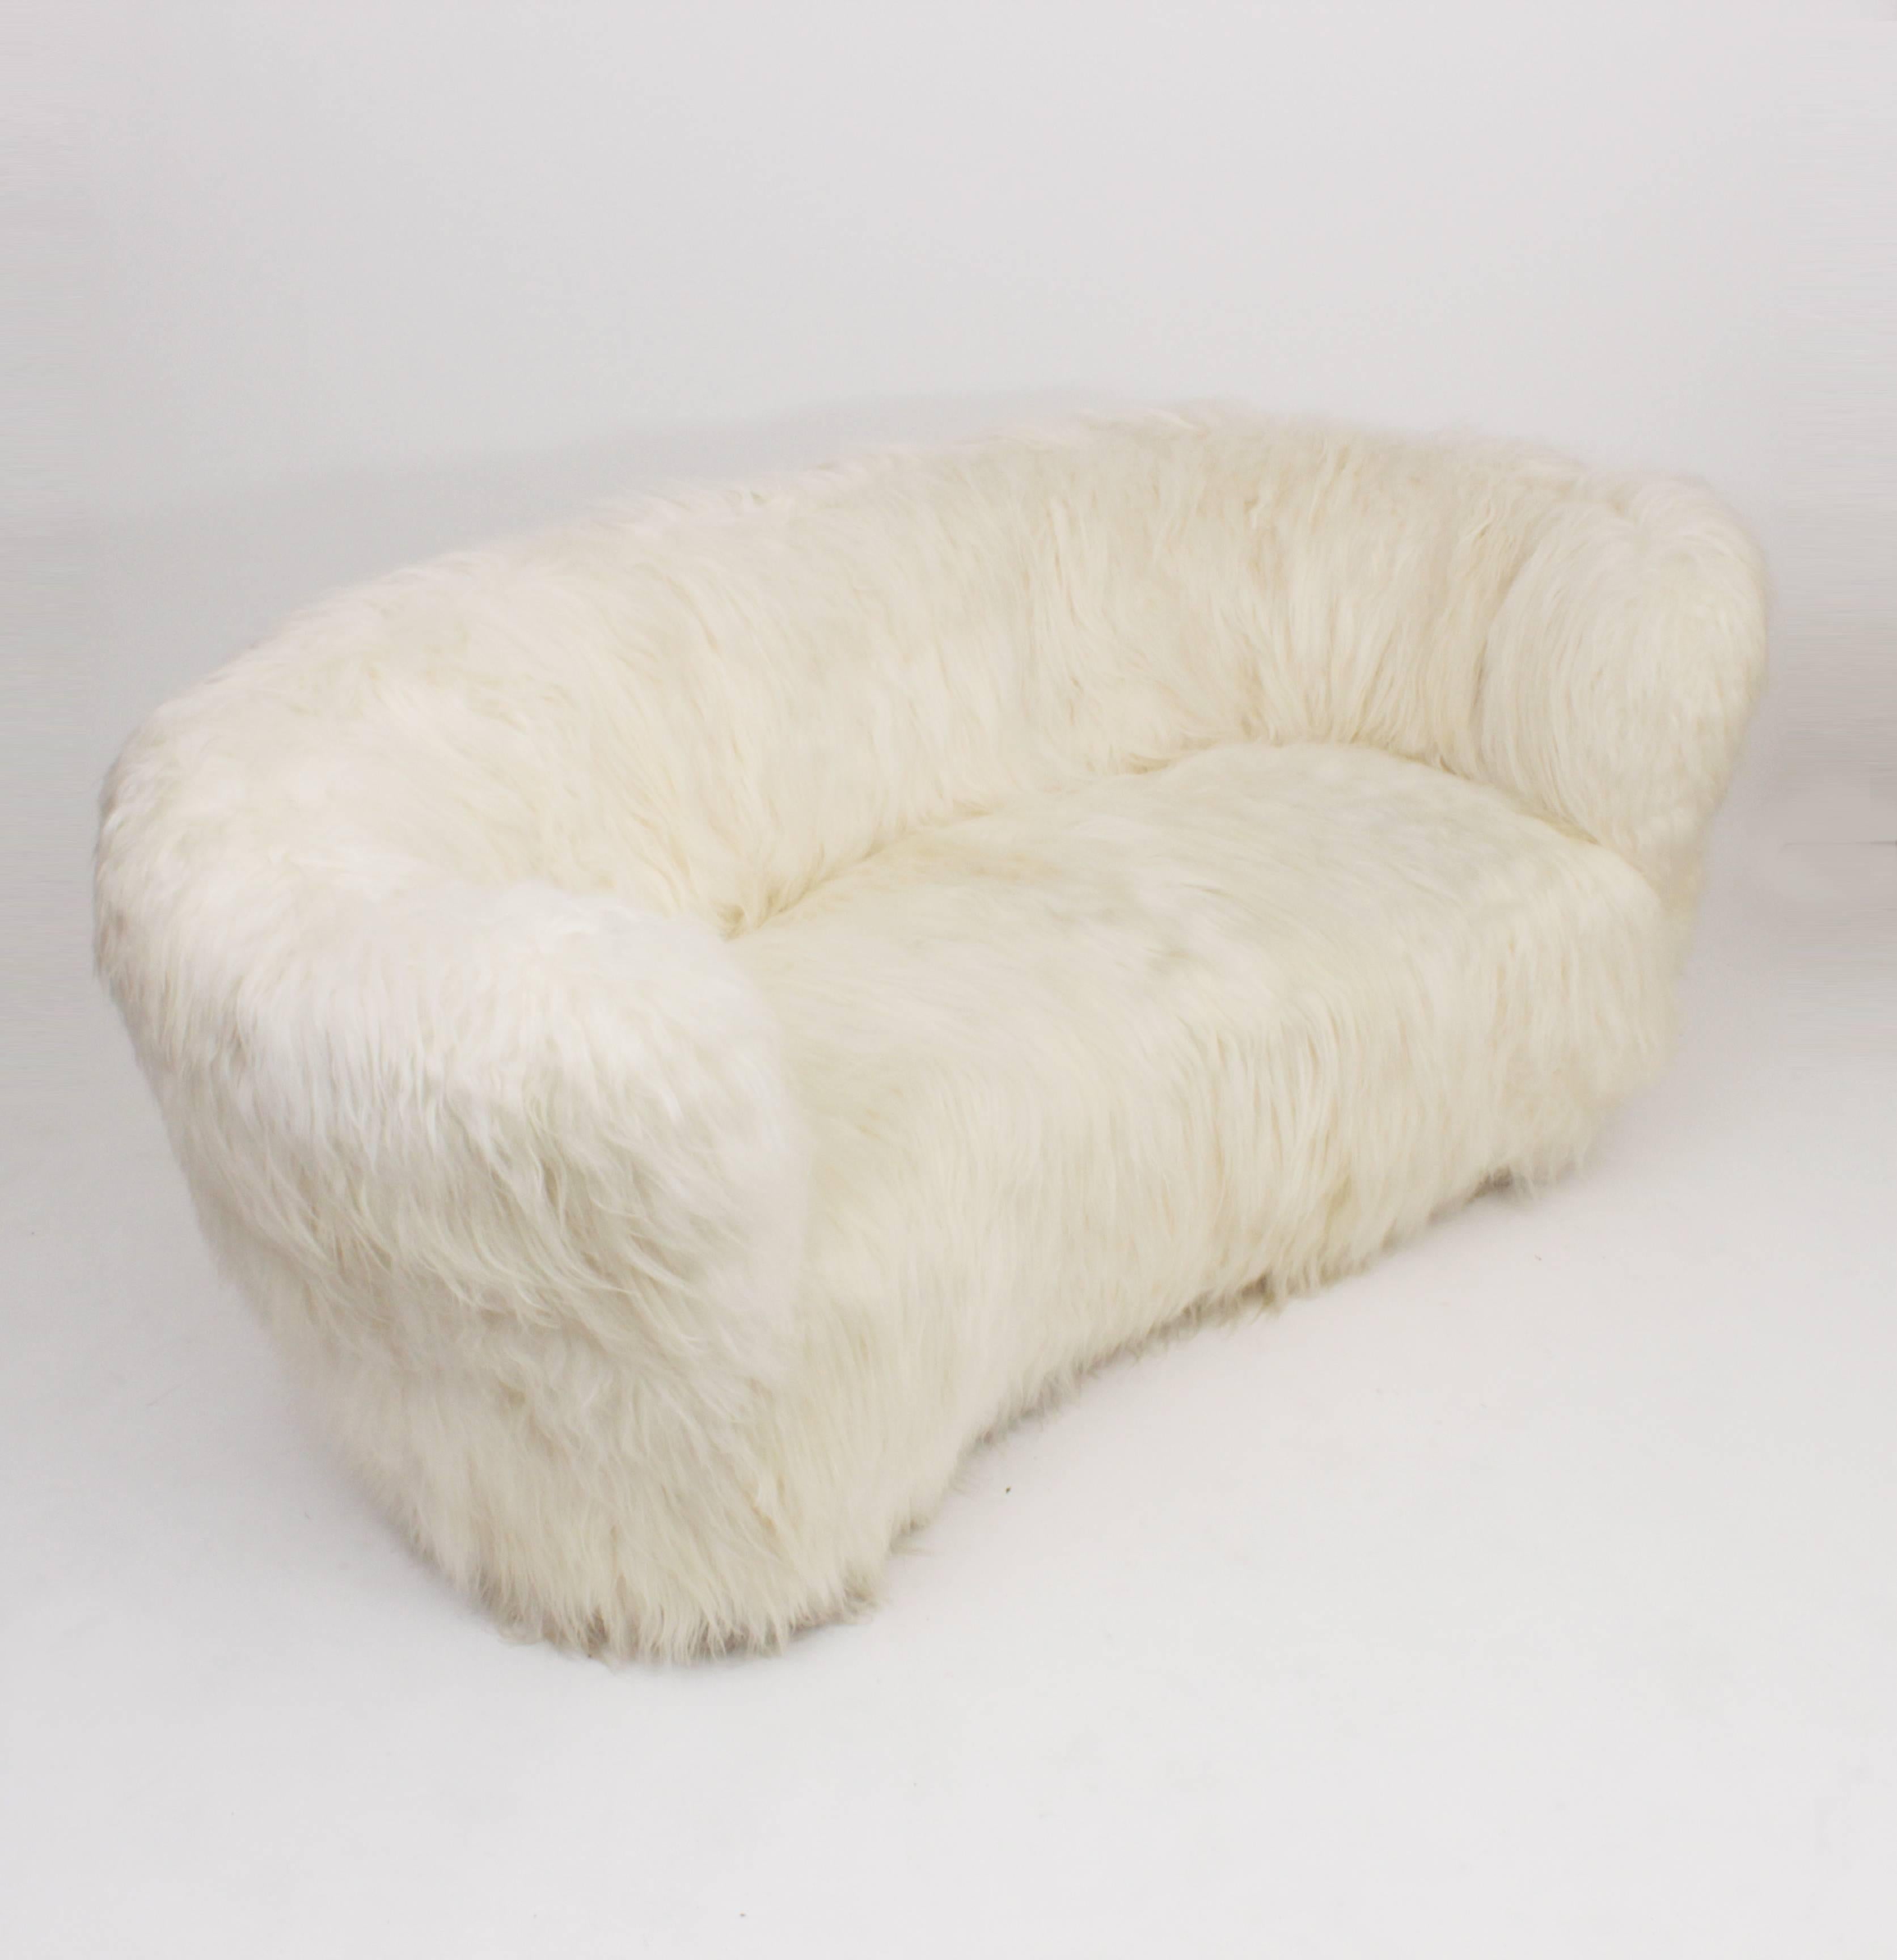 Danish Three-Seat Curved Sofa by Slagelse, in White Sheepskin Denmark, circa 1940 For Sale